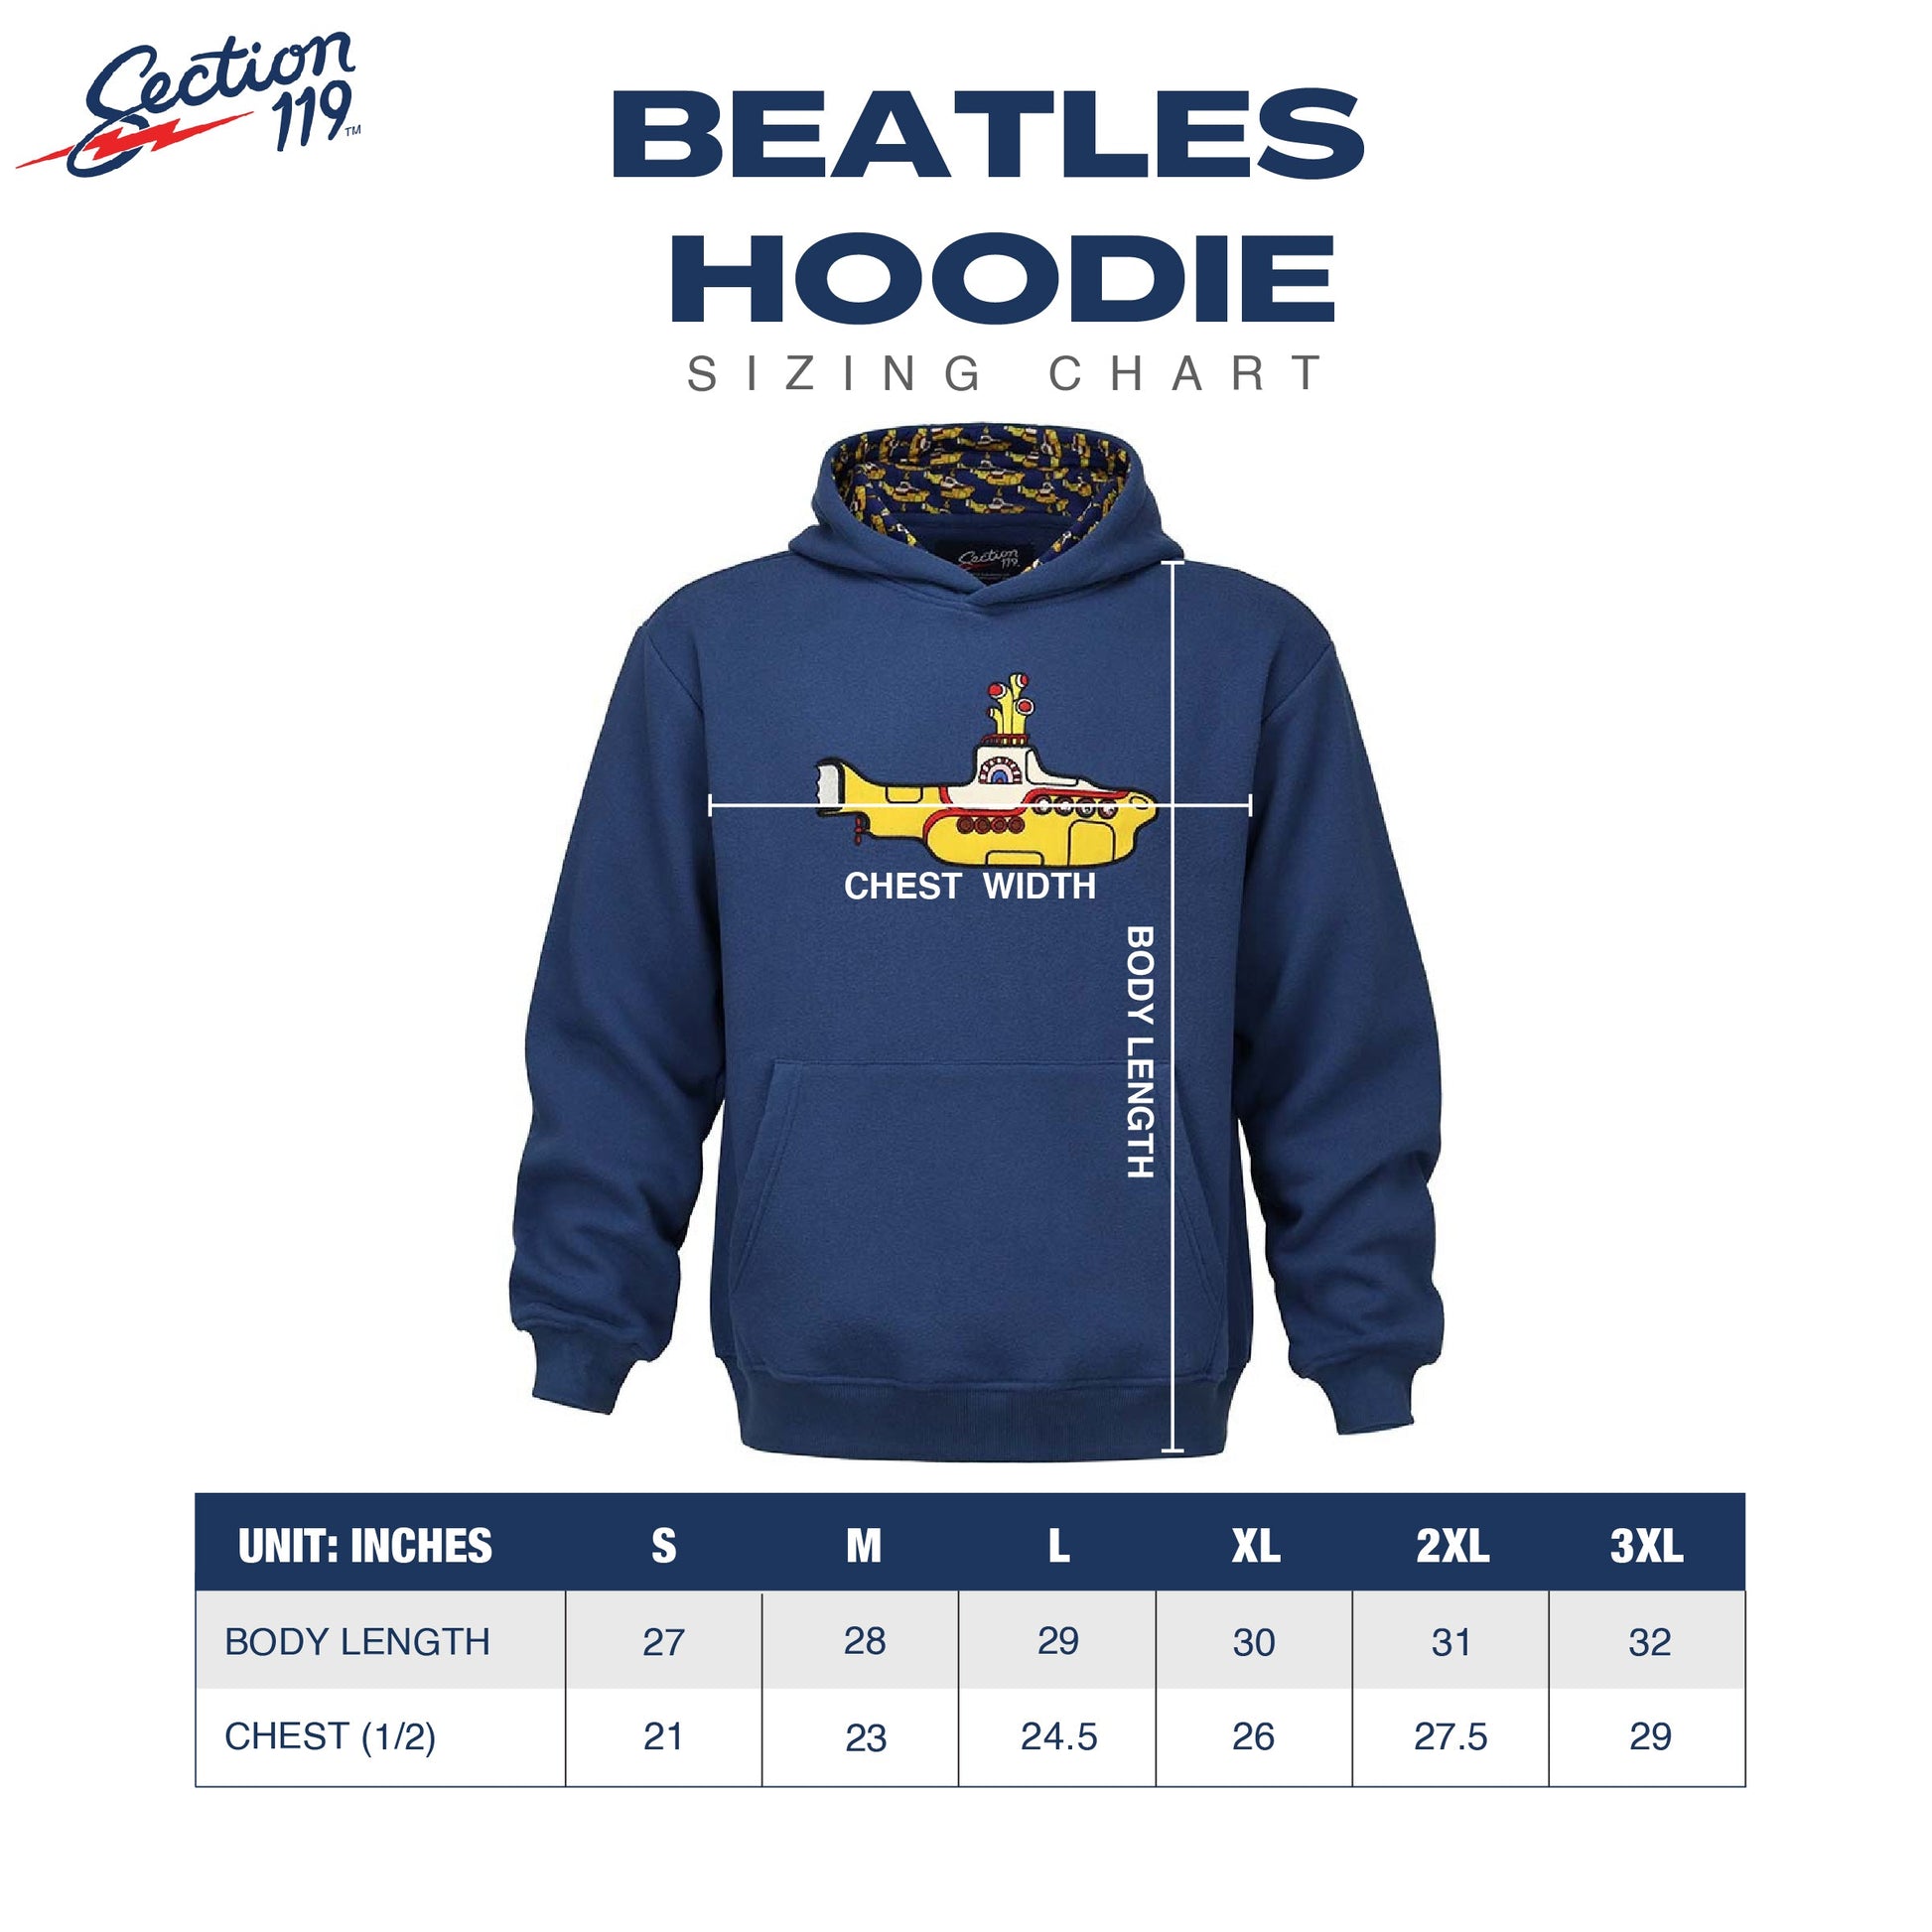 The Beatles Hoodie Blue Yellow Submarine - Section 119